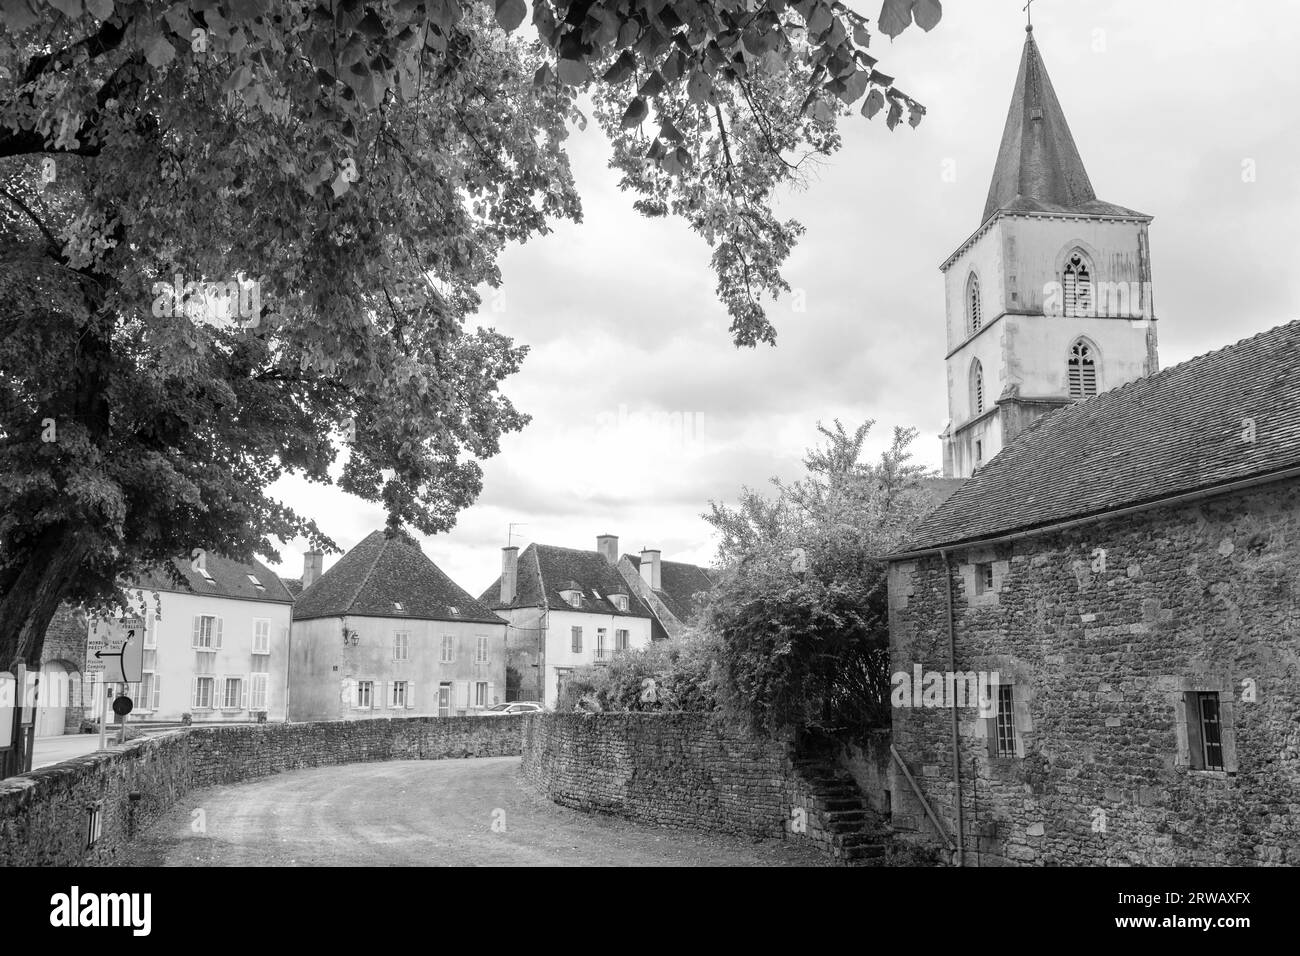 Black and White Photo of Eglise Saint Symphorienin the grounds of Chateaux d'Epoisses in the Côte-d'Or department of Burgundy France. Stock Photo